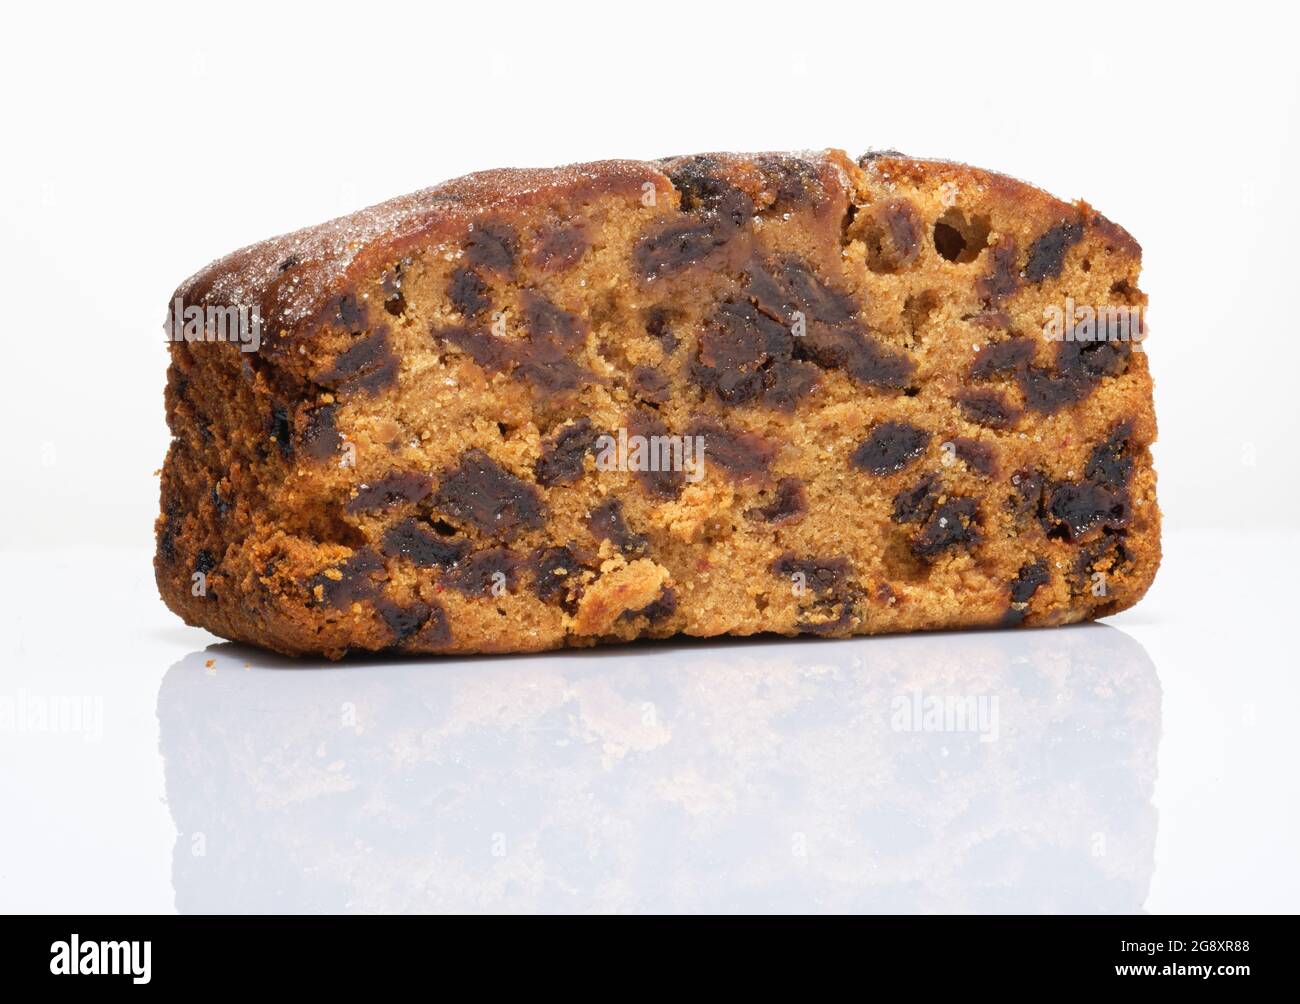 A small fruit cake. A mix of currants, raisins and other dried fruit with flour and egg and baked in an oven to make a moist fruit cake. Stock Photo